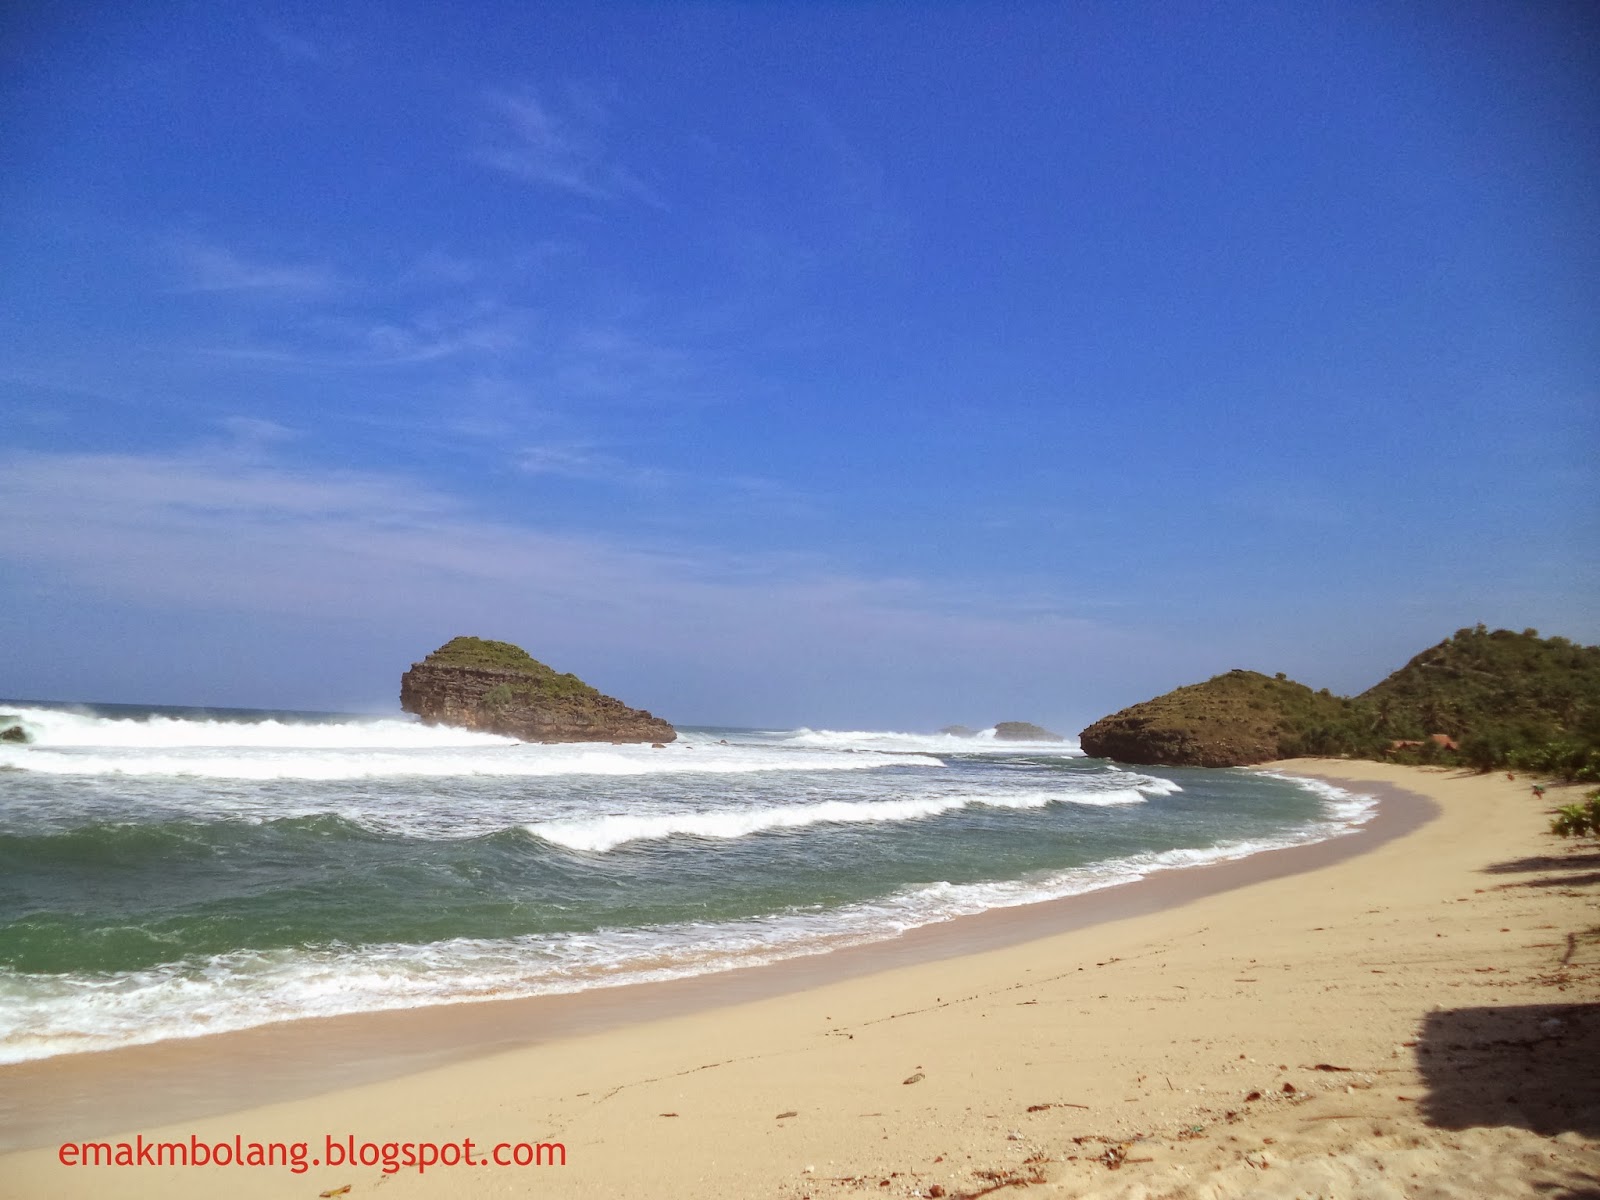 One of The Best Surfing Place in The World - Emak Mbolang